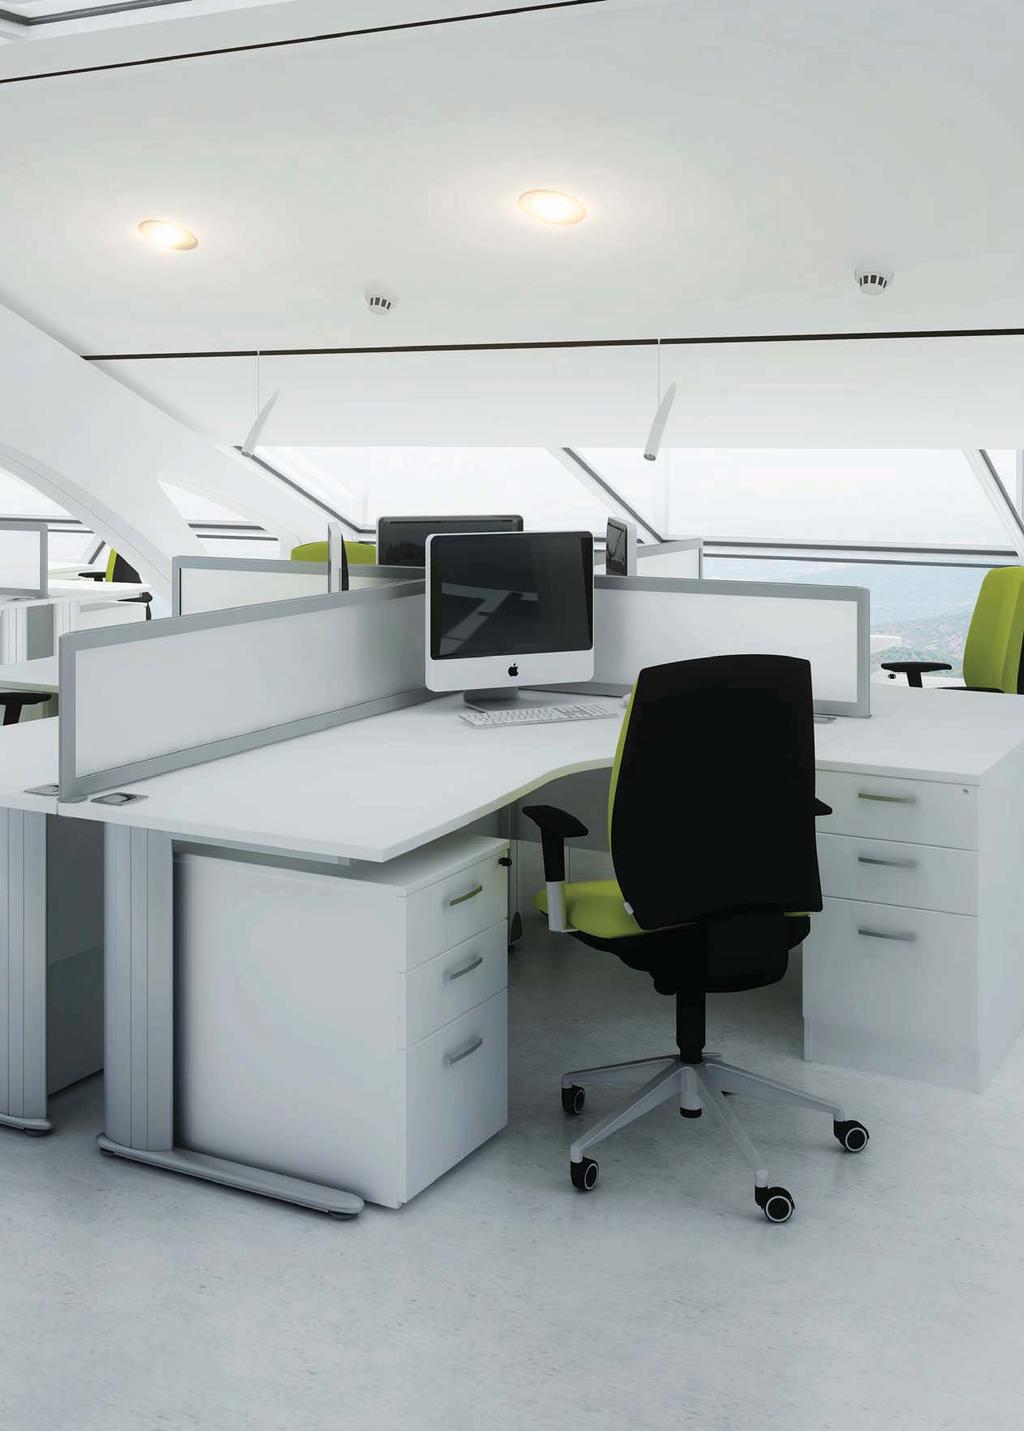 Crescent Desking Crescent desking provides the traditional layout suitable for most offices.